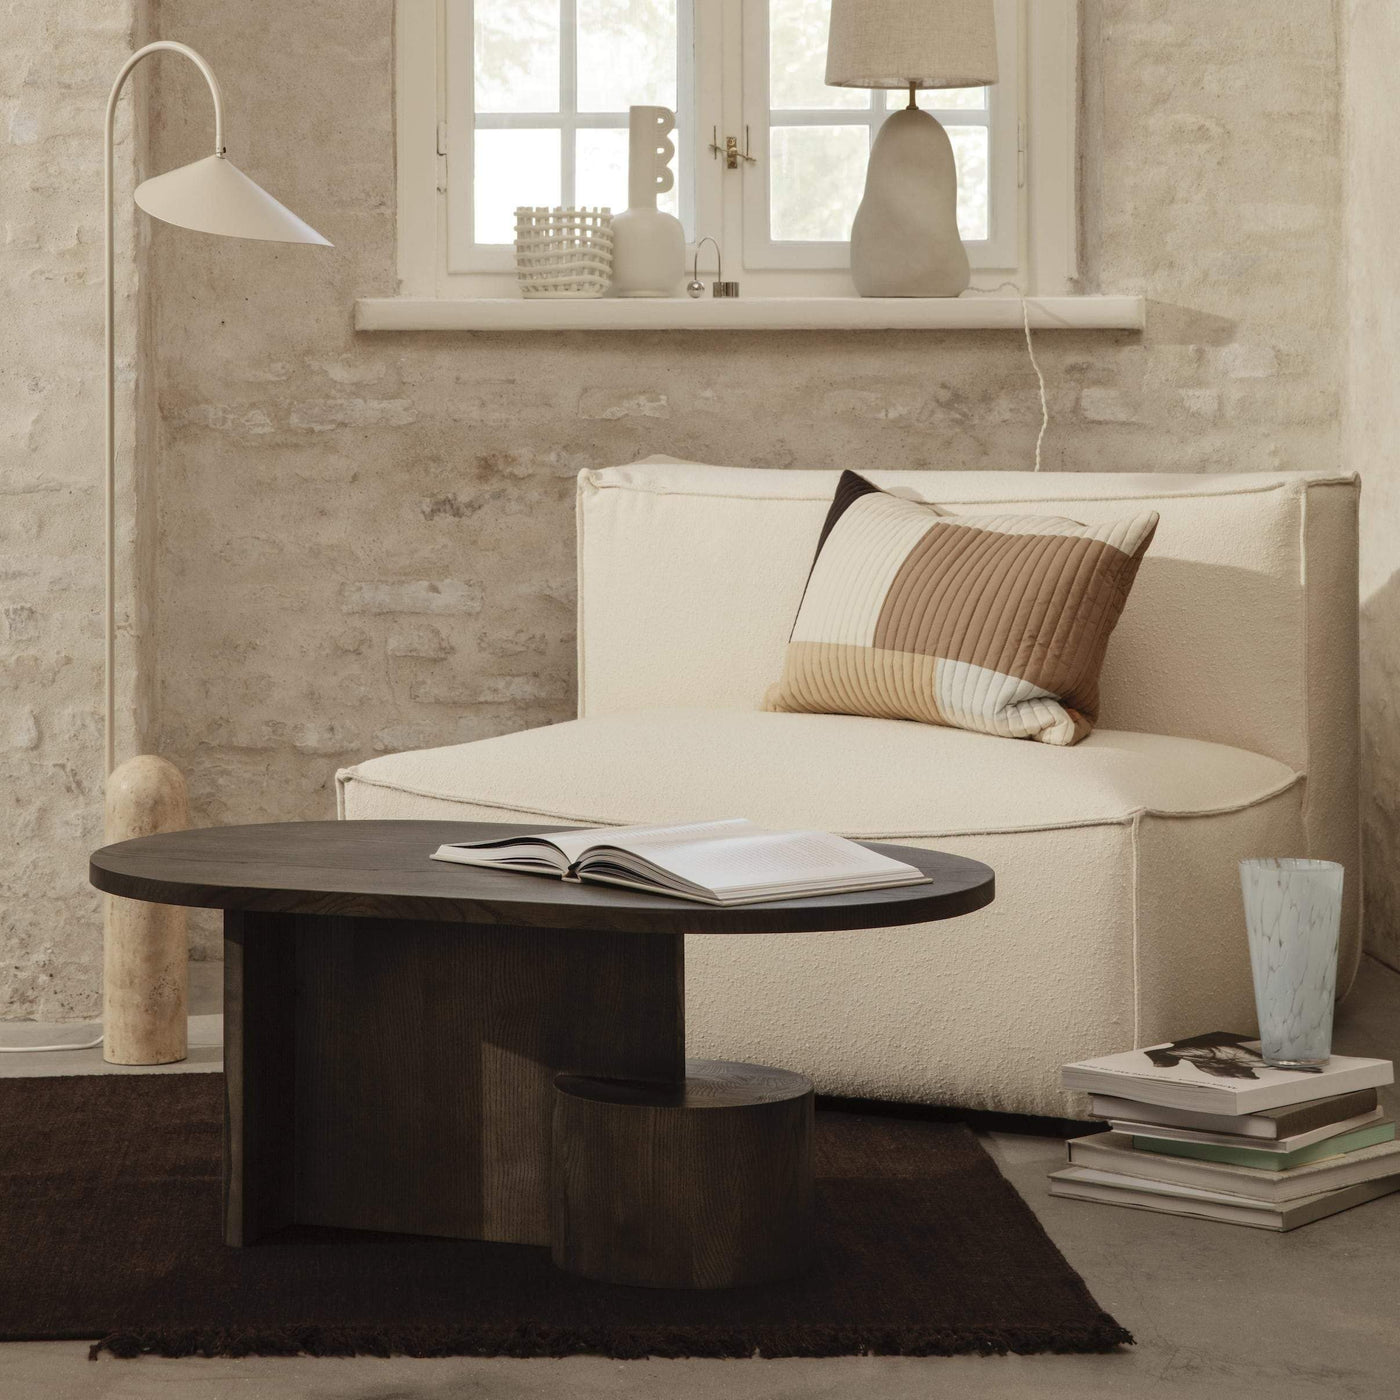 Ferm Living Insert Coffee Table in black stained oak. Shop now at someday designs